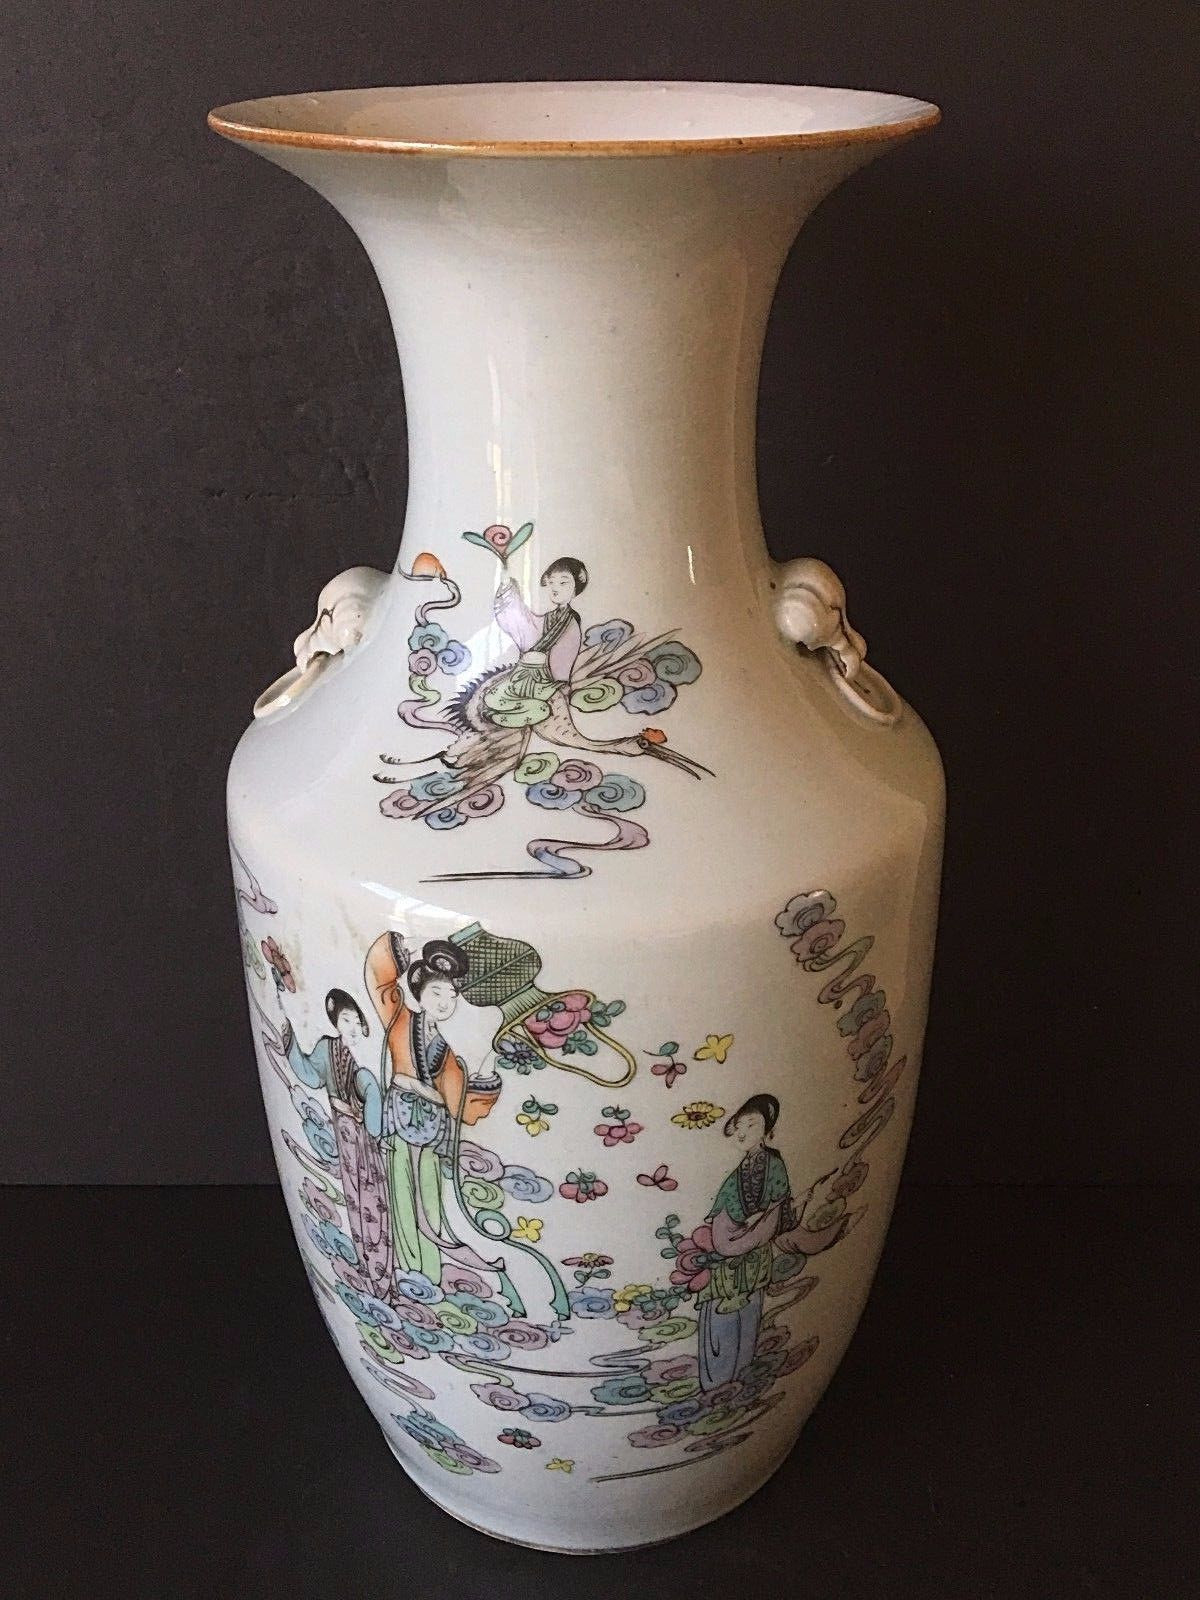 25 Cute Antique Chinese Pottery Vases 2024 free download antique chinese pottery vases of large urn vase photos antiques gifts chinese antique 19th century throughout large urn vase photos antiques gifts chinese antique 19th century large porcelai